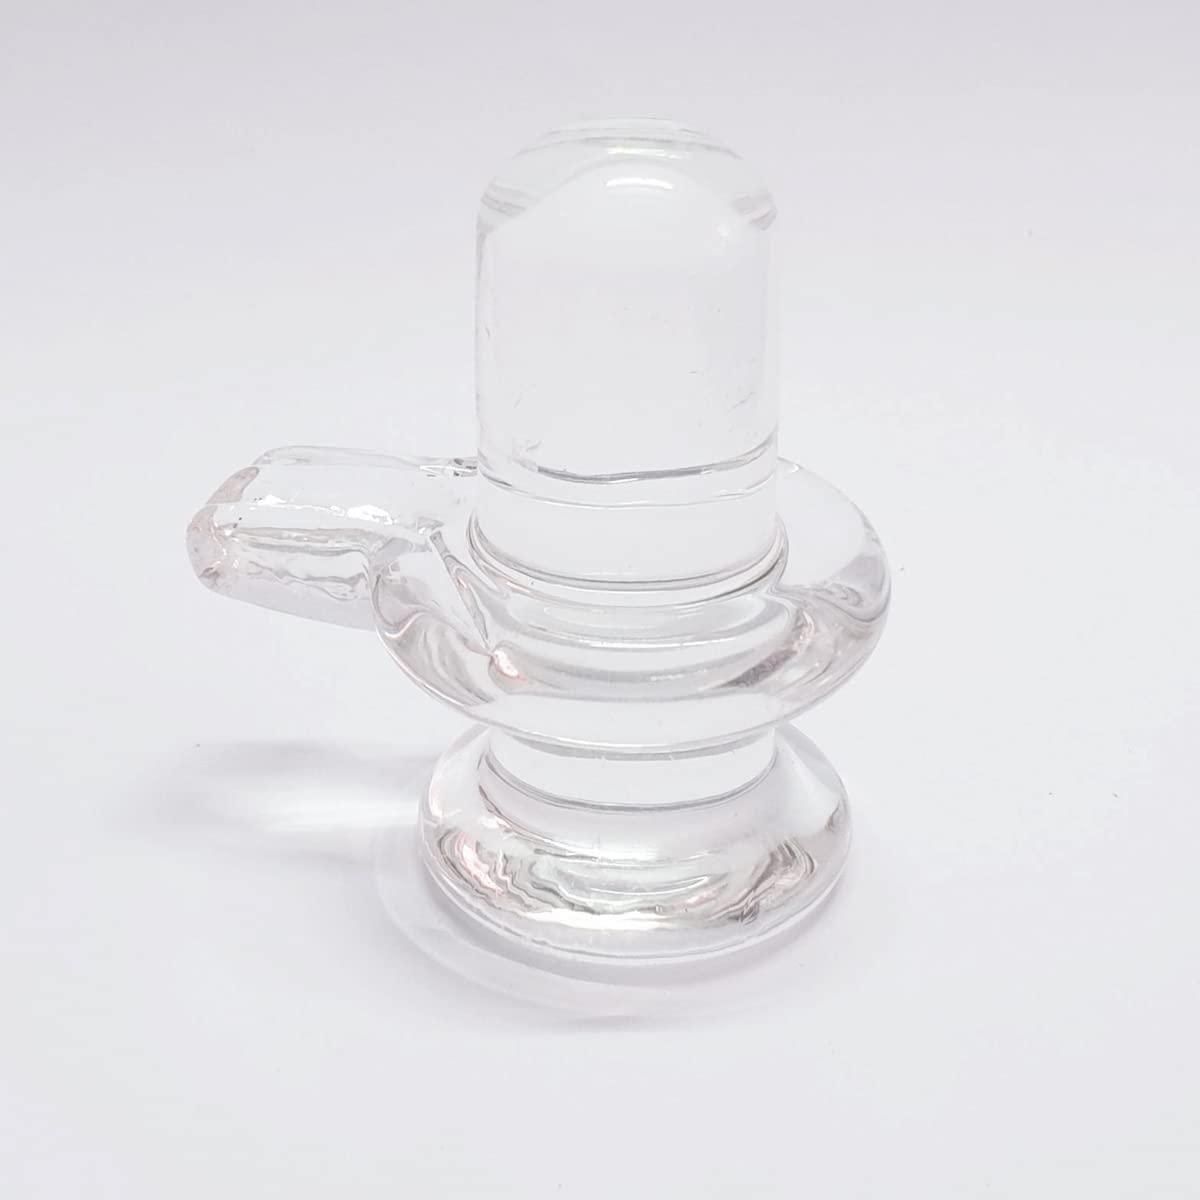 Crystal Sphatik Shivling/Big Size Decorative Showpiece for Home Pooja - 4 inches, 20 grams (White)